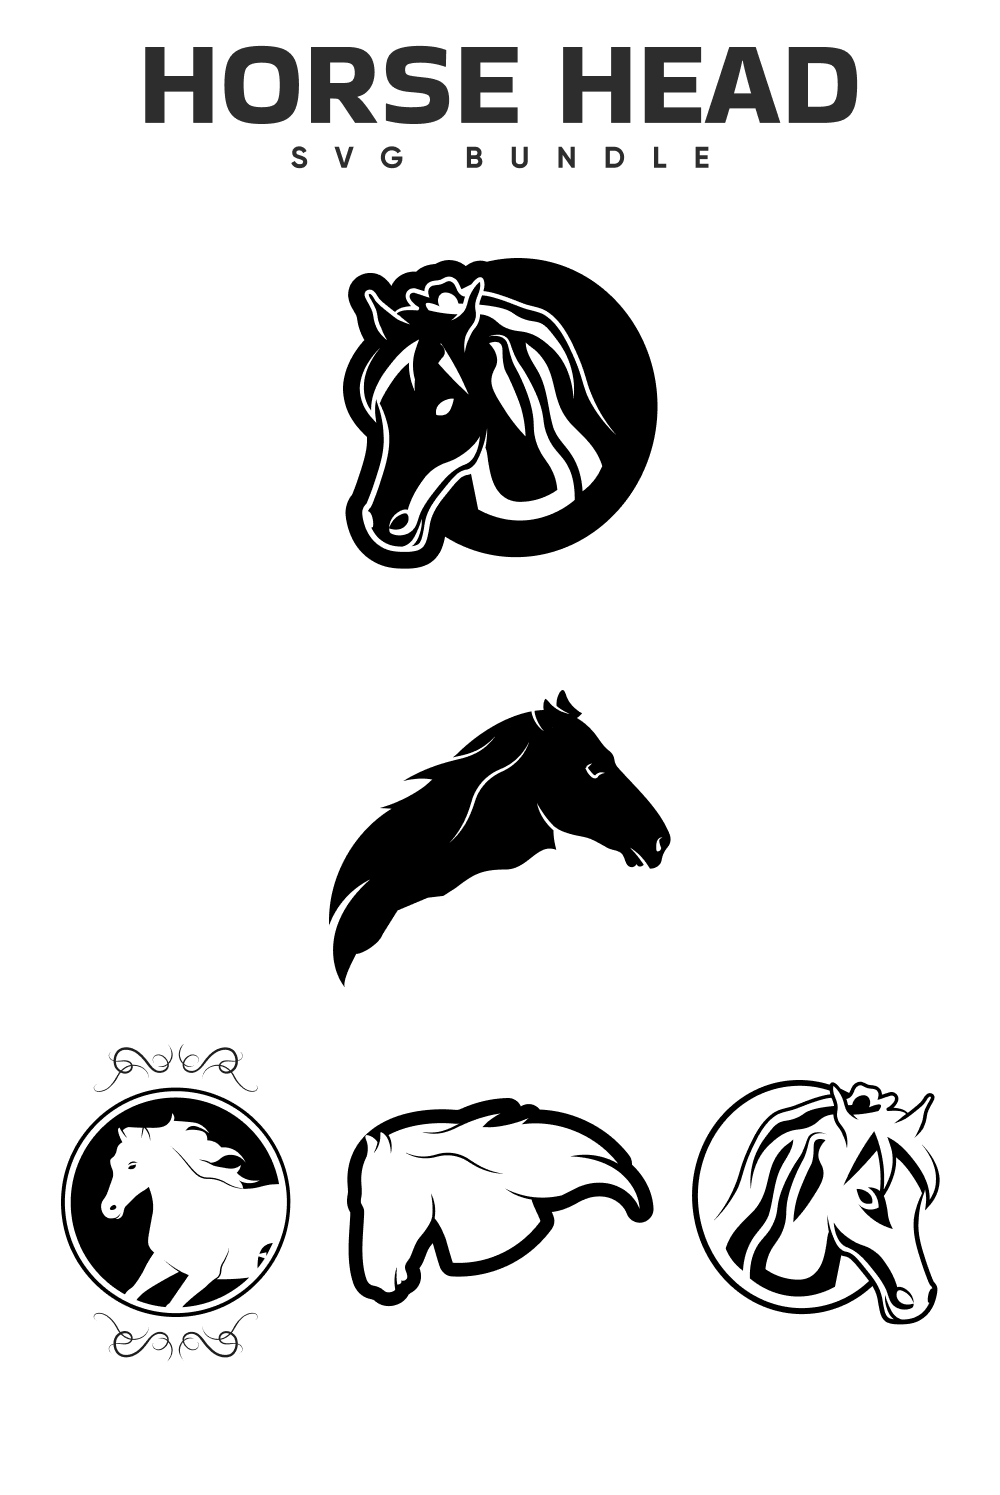 The horse head logo is shown in black and white.